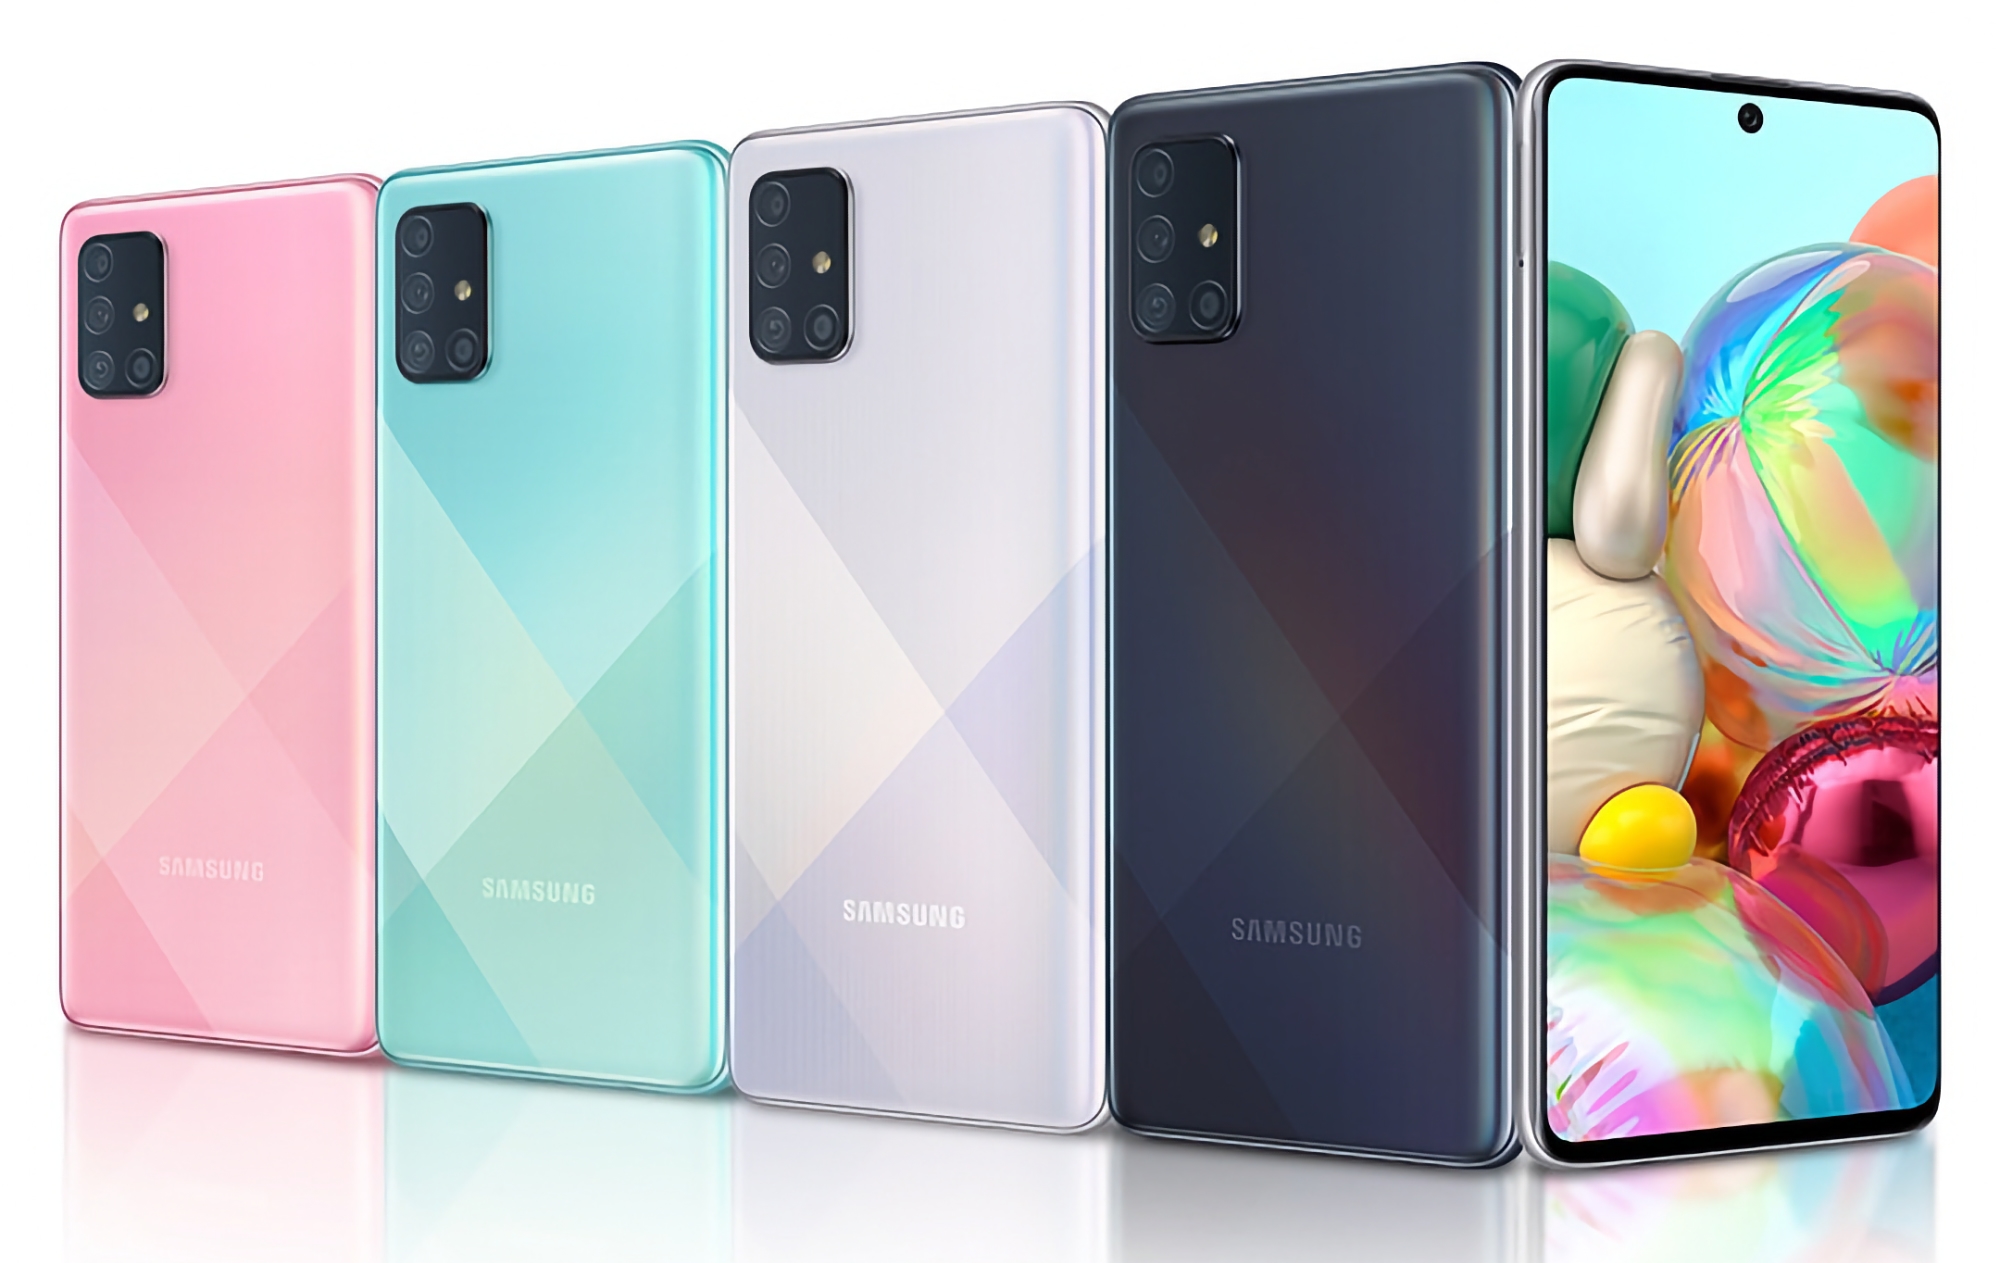 Following the Galaxy A51 5G: Samsung begins updating Galaxy A71 and Galaxy A71 5G to One UI 5.1